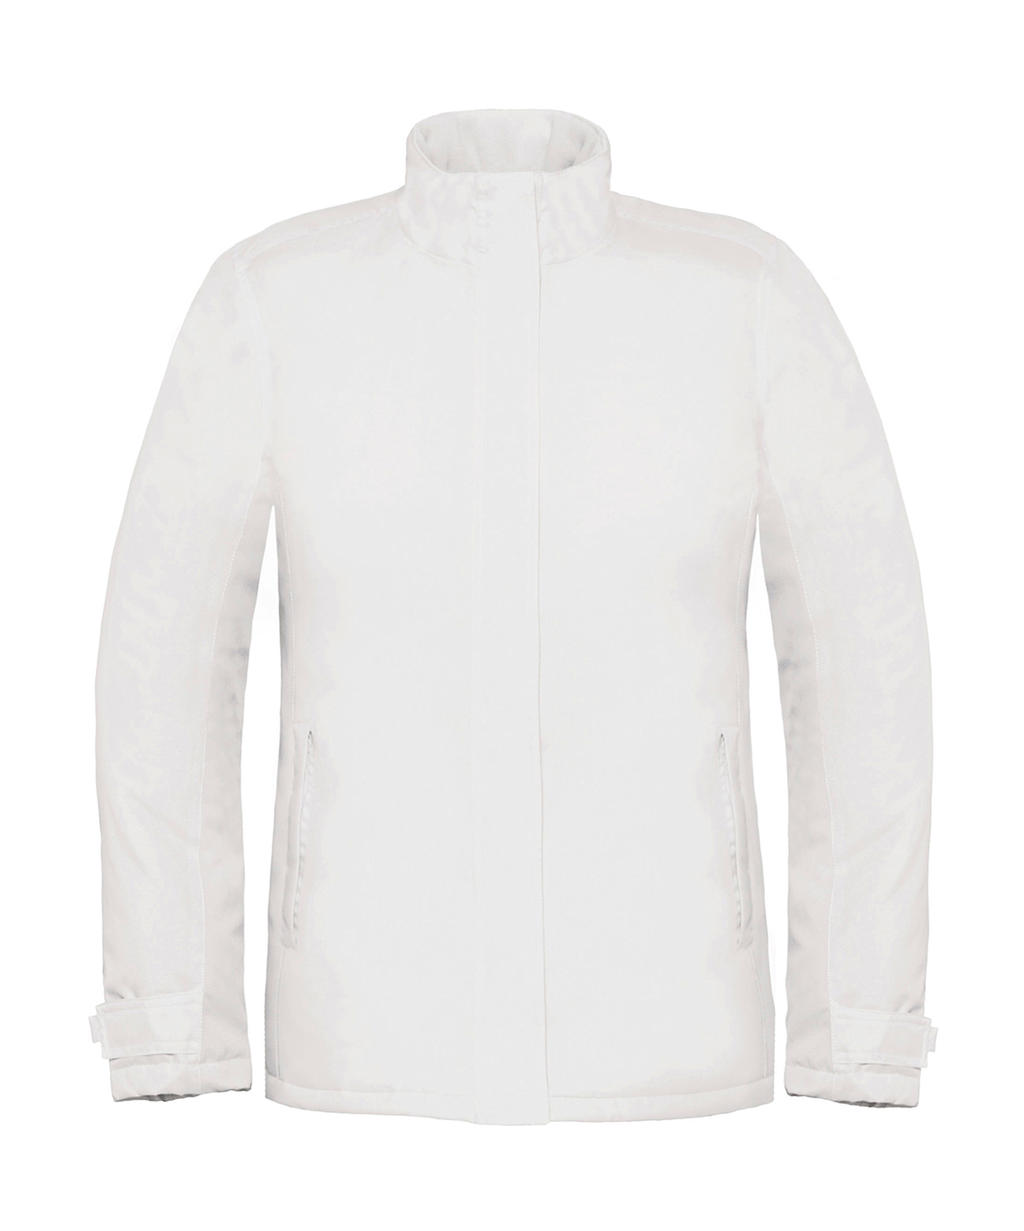  Real+/women Heavy Weight Jacket in Farbe White